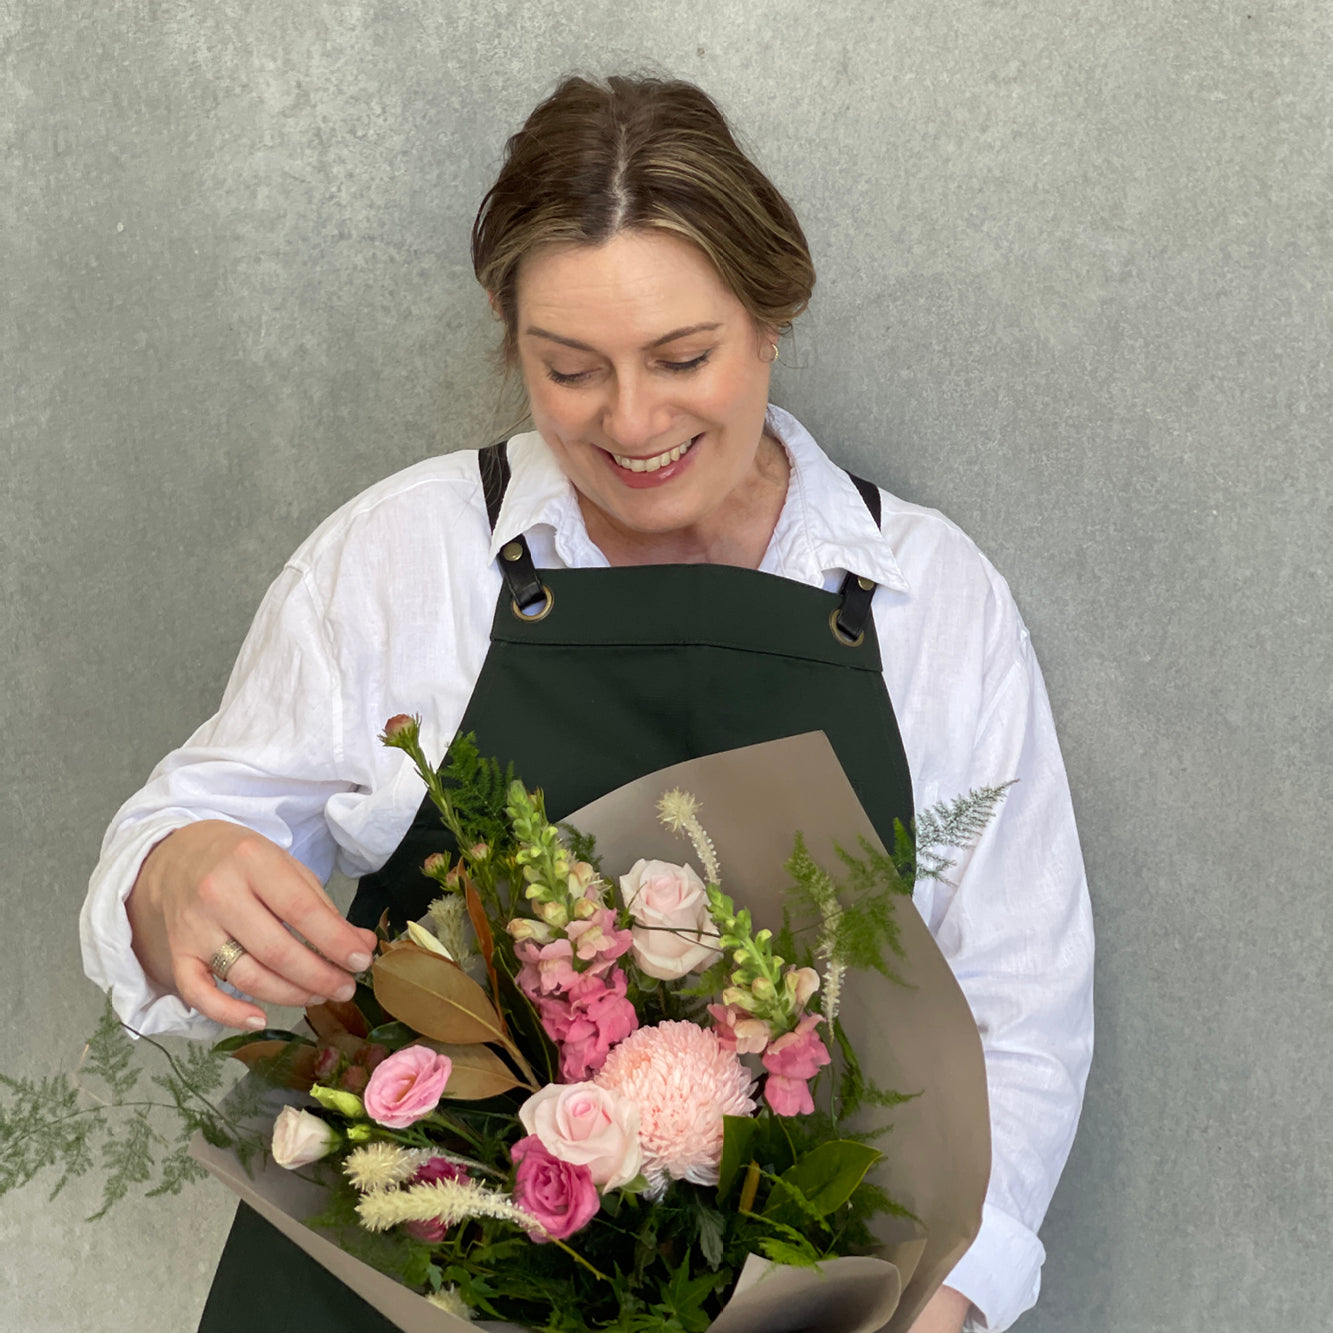 Tina from Teka Flowers, trusted florist in Perth with a wide variety of gorgeous flower arrangements and same day delivery